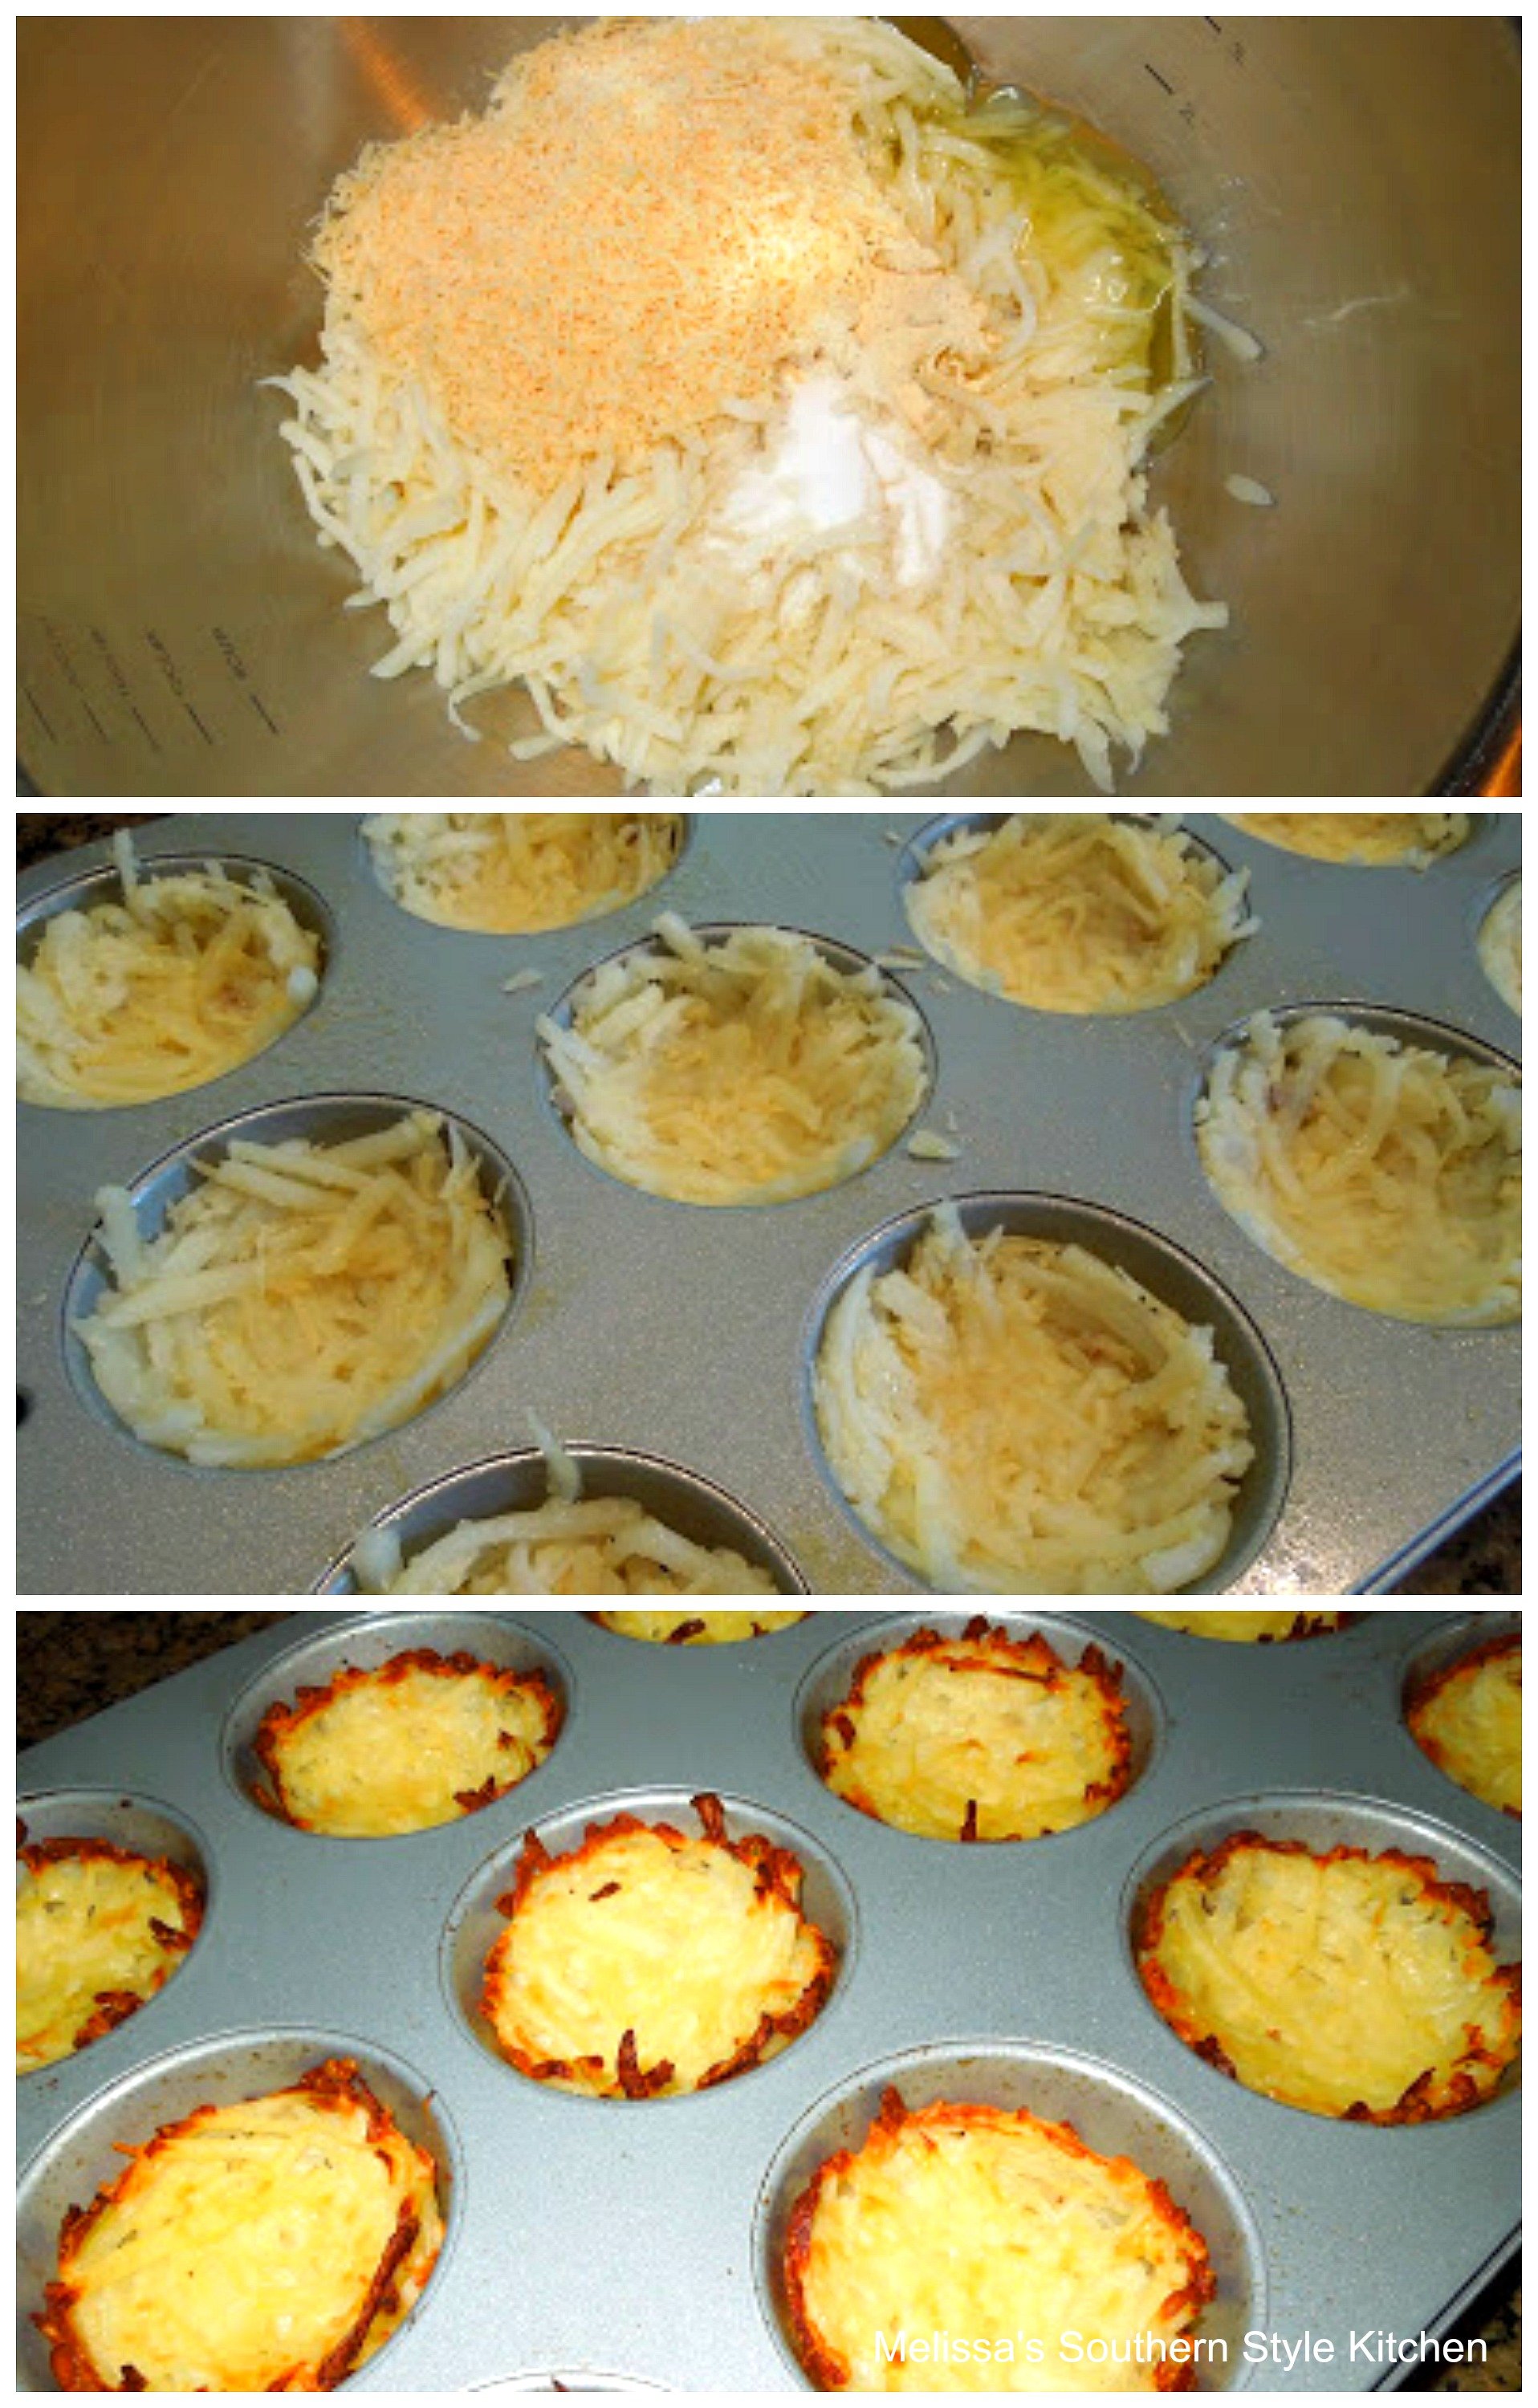 Step-by-step preparation images and ingredients for Nested Potato Skins